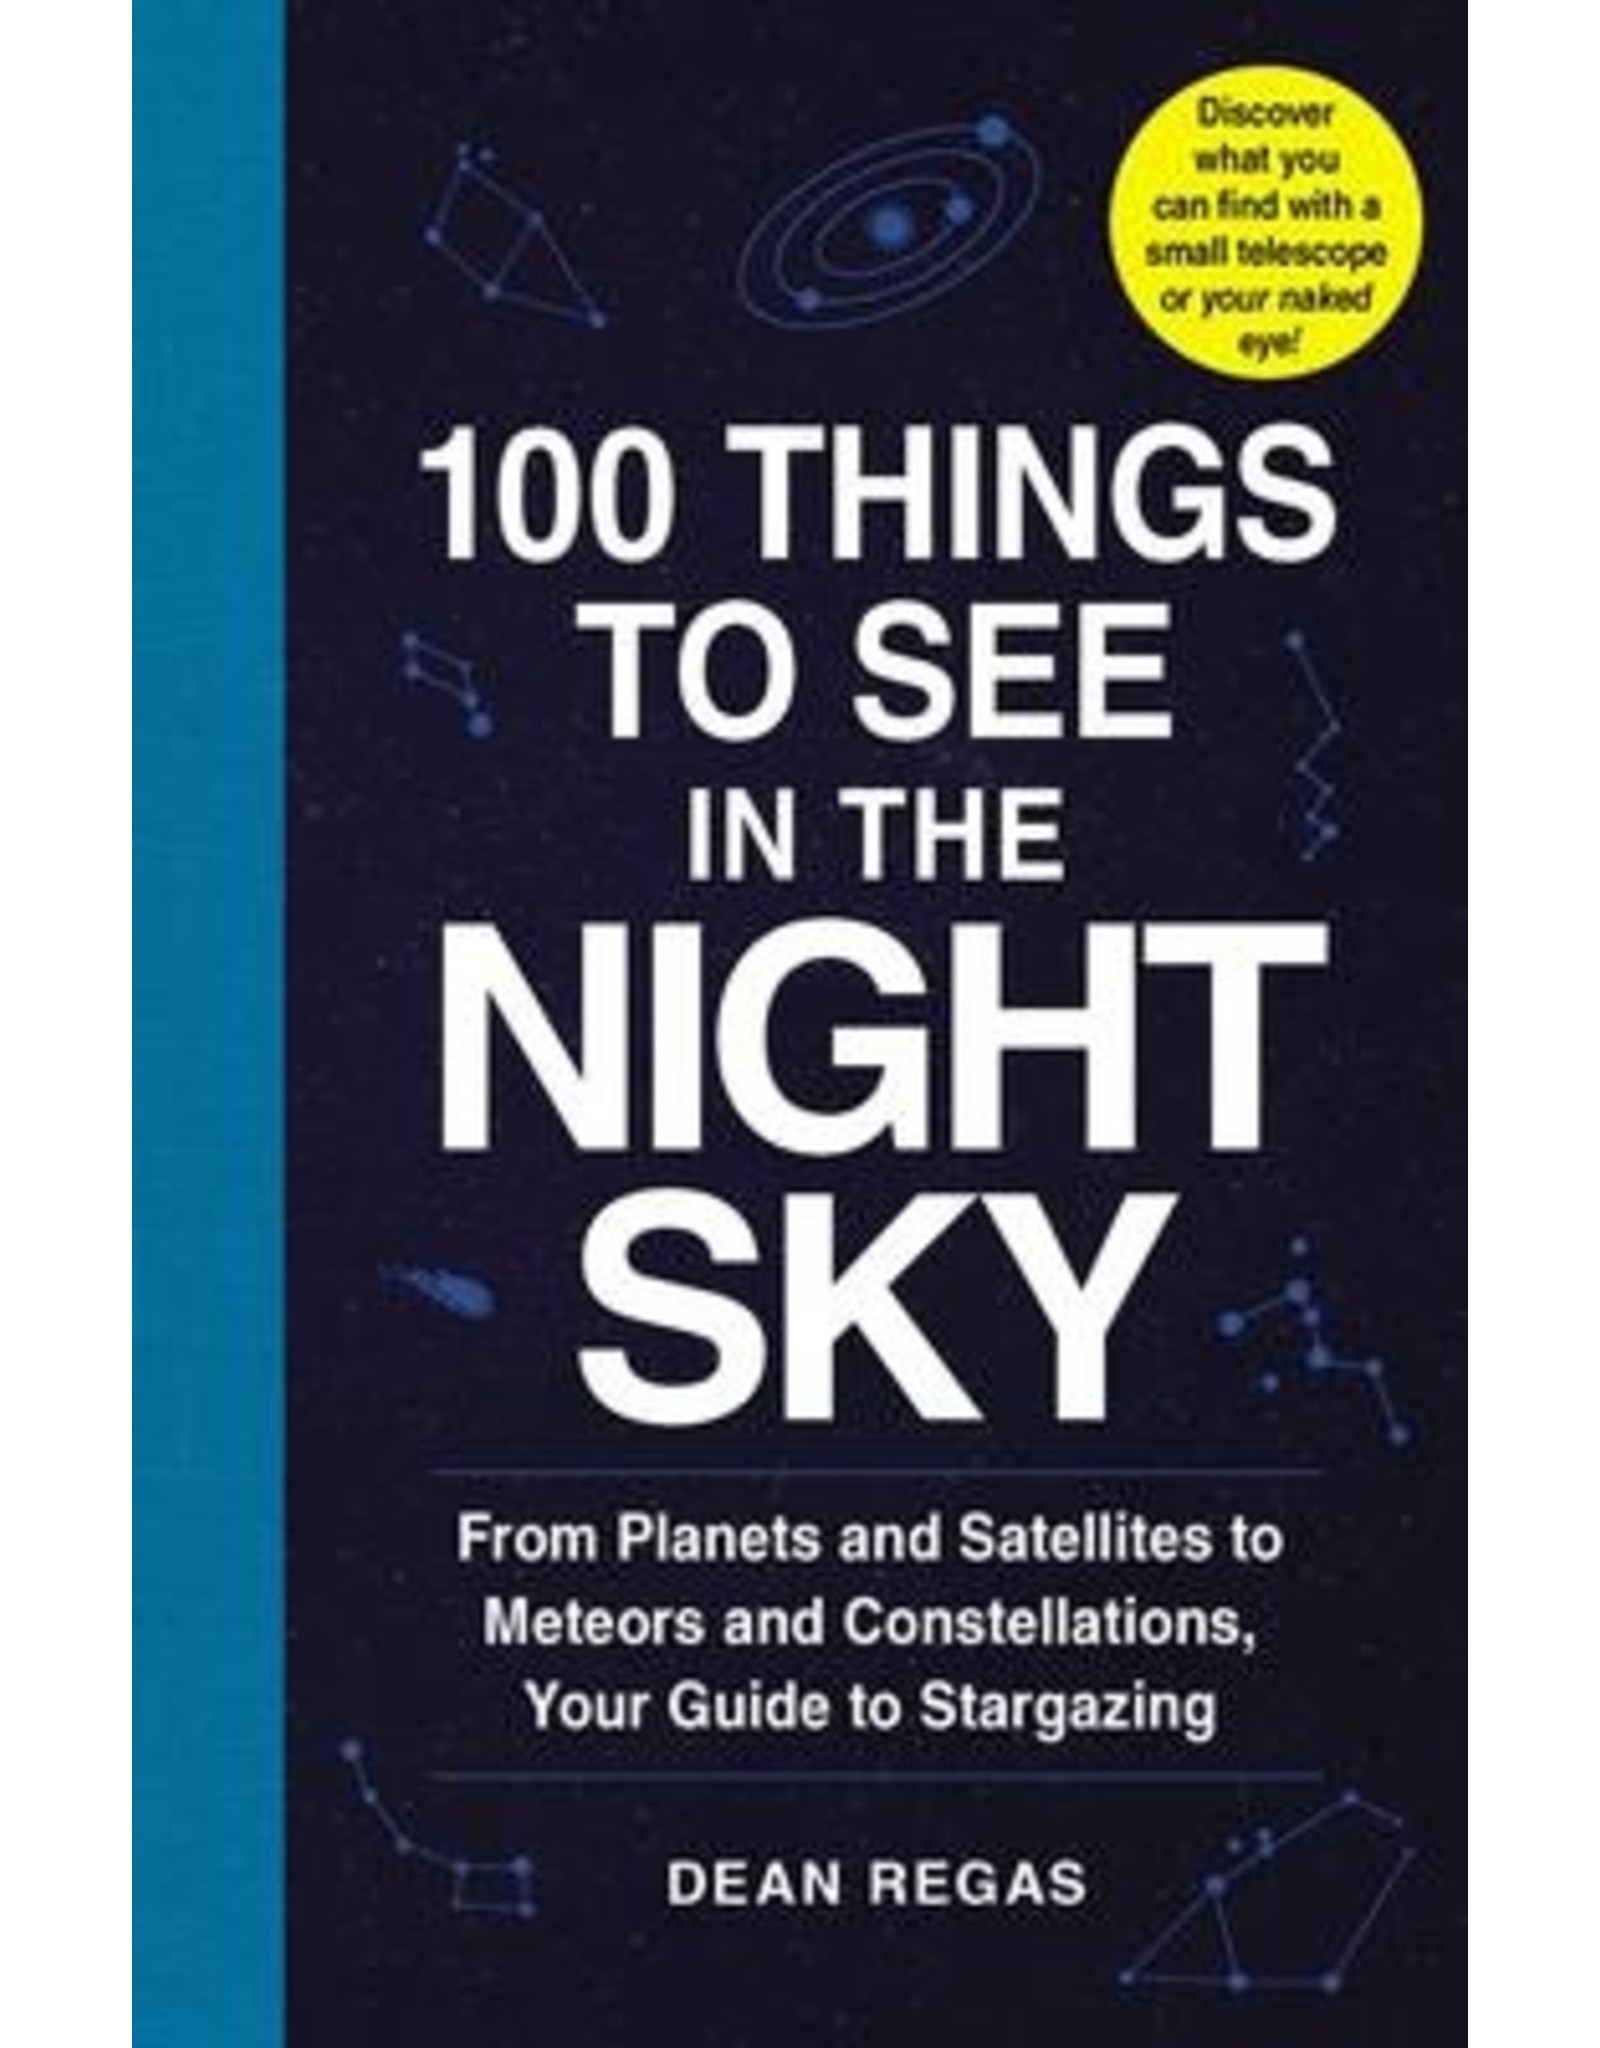 BOOK 100 THINGS TO SEE IN THE NIGHT SKY